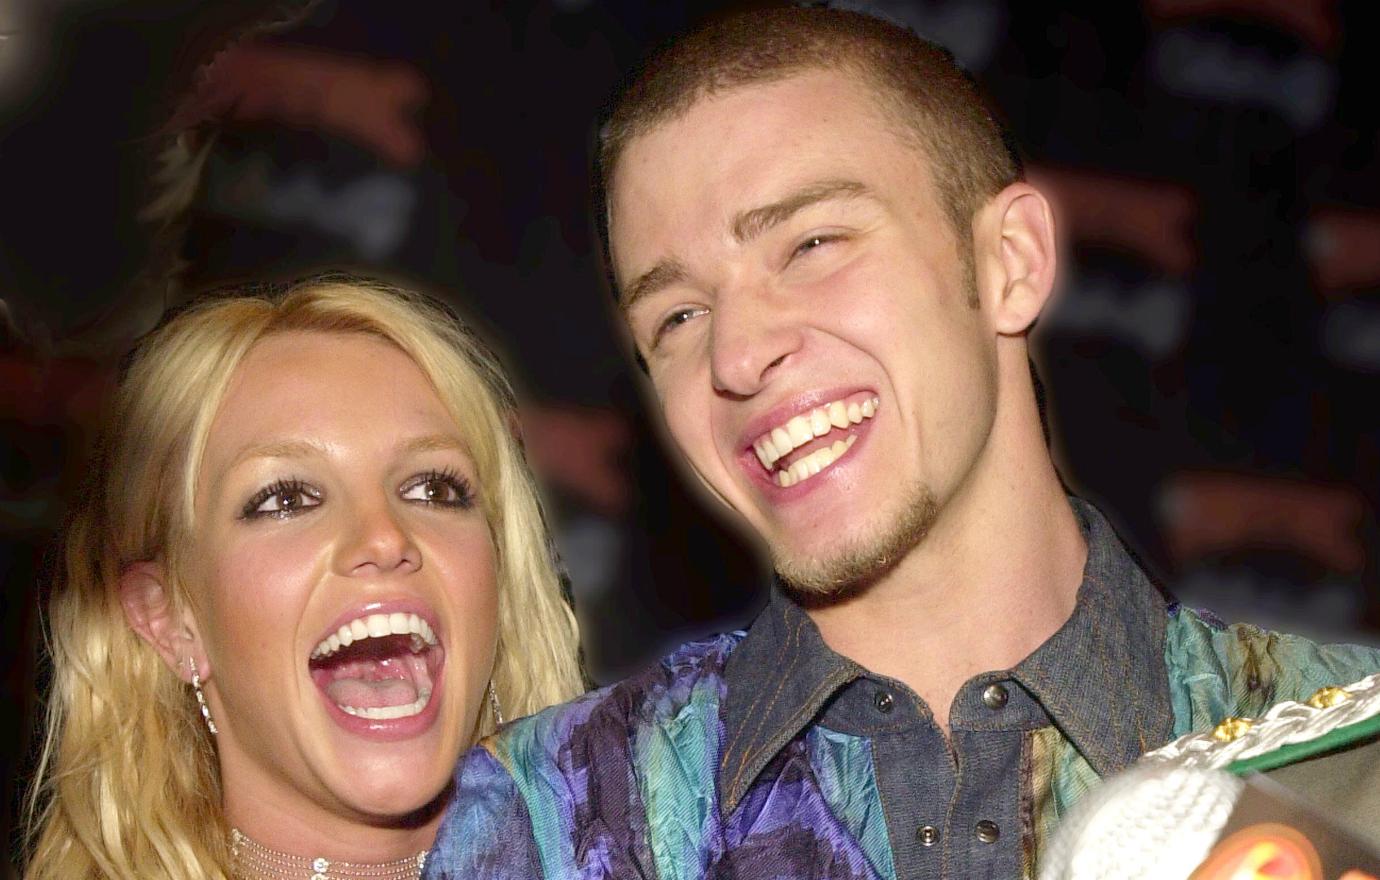 Britney Spears and Justin Timberlake's Relationship Timeline